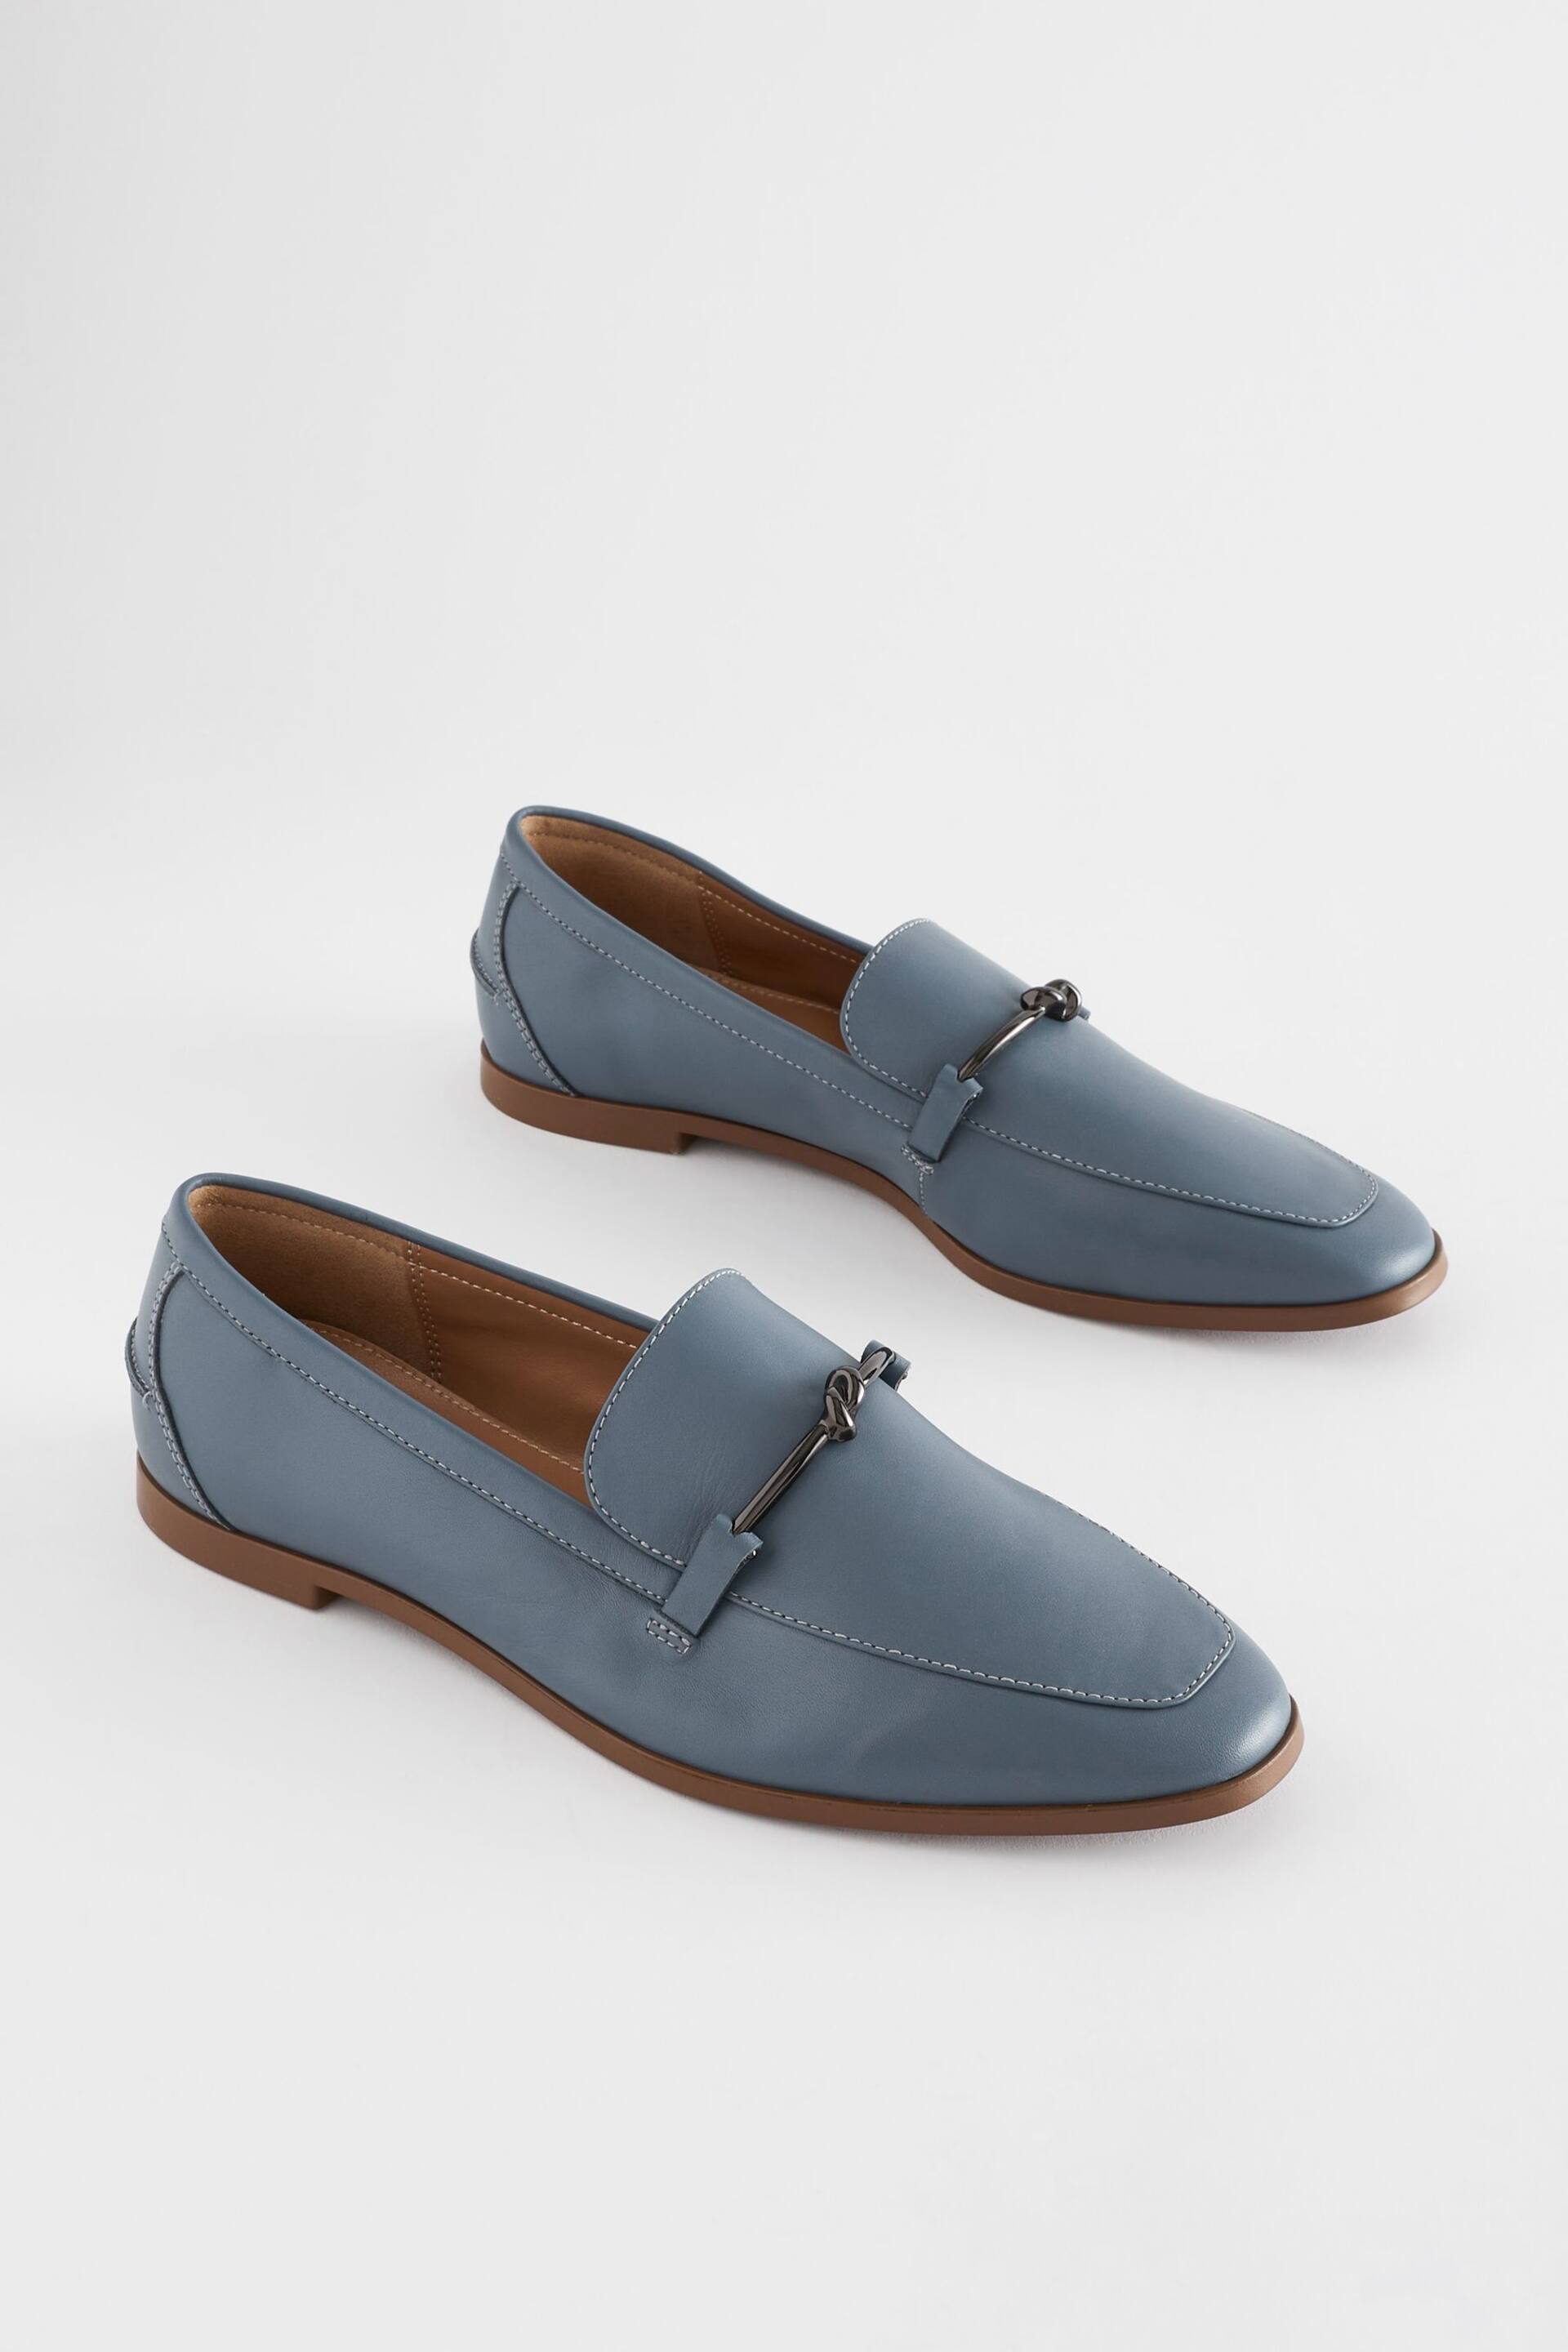 Blue Forever Comfort® Leather Knot Hardware Loafers - Image 1 of 6